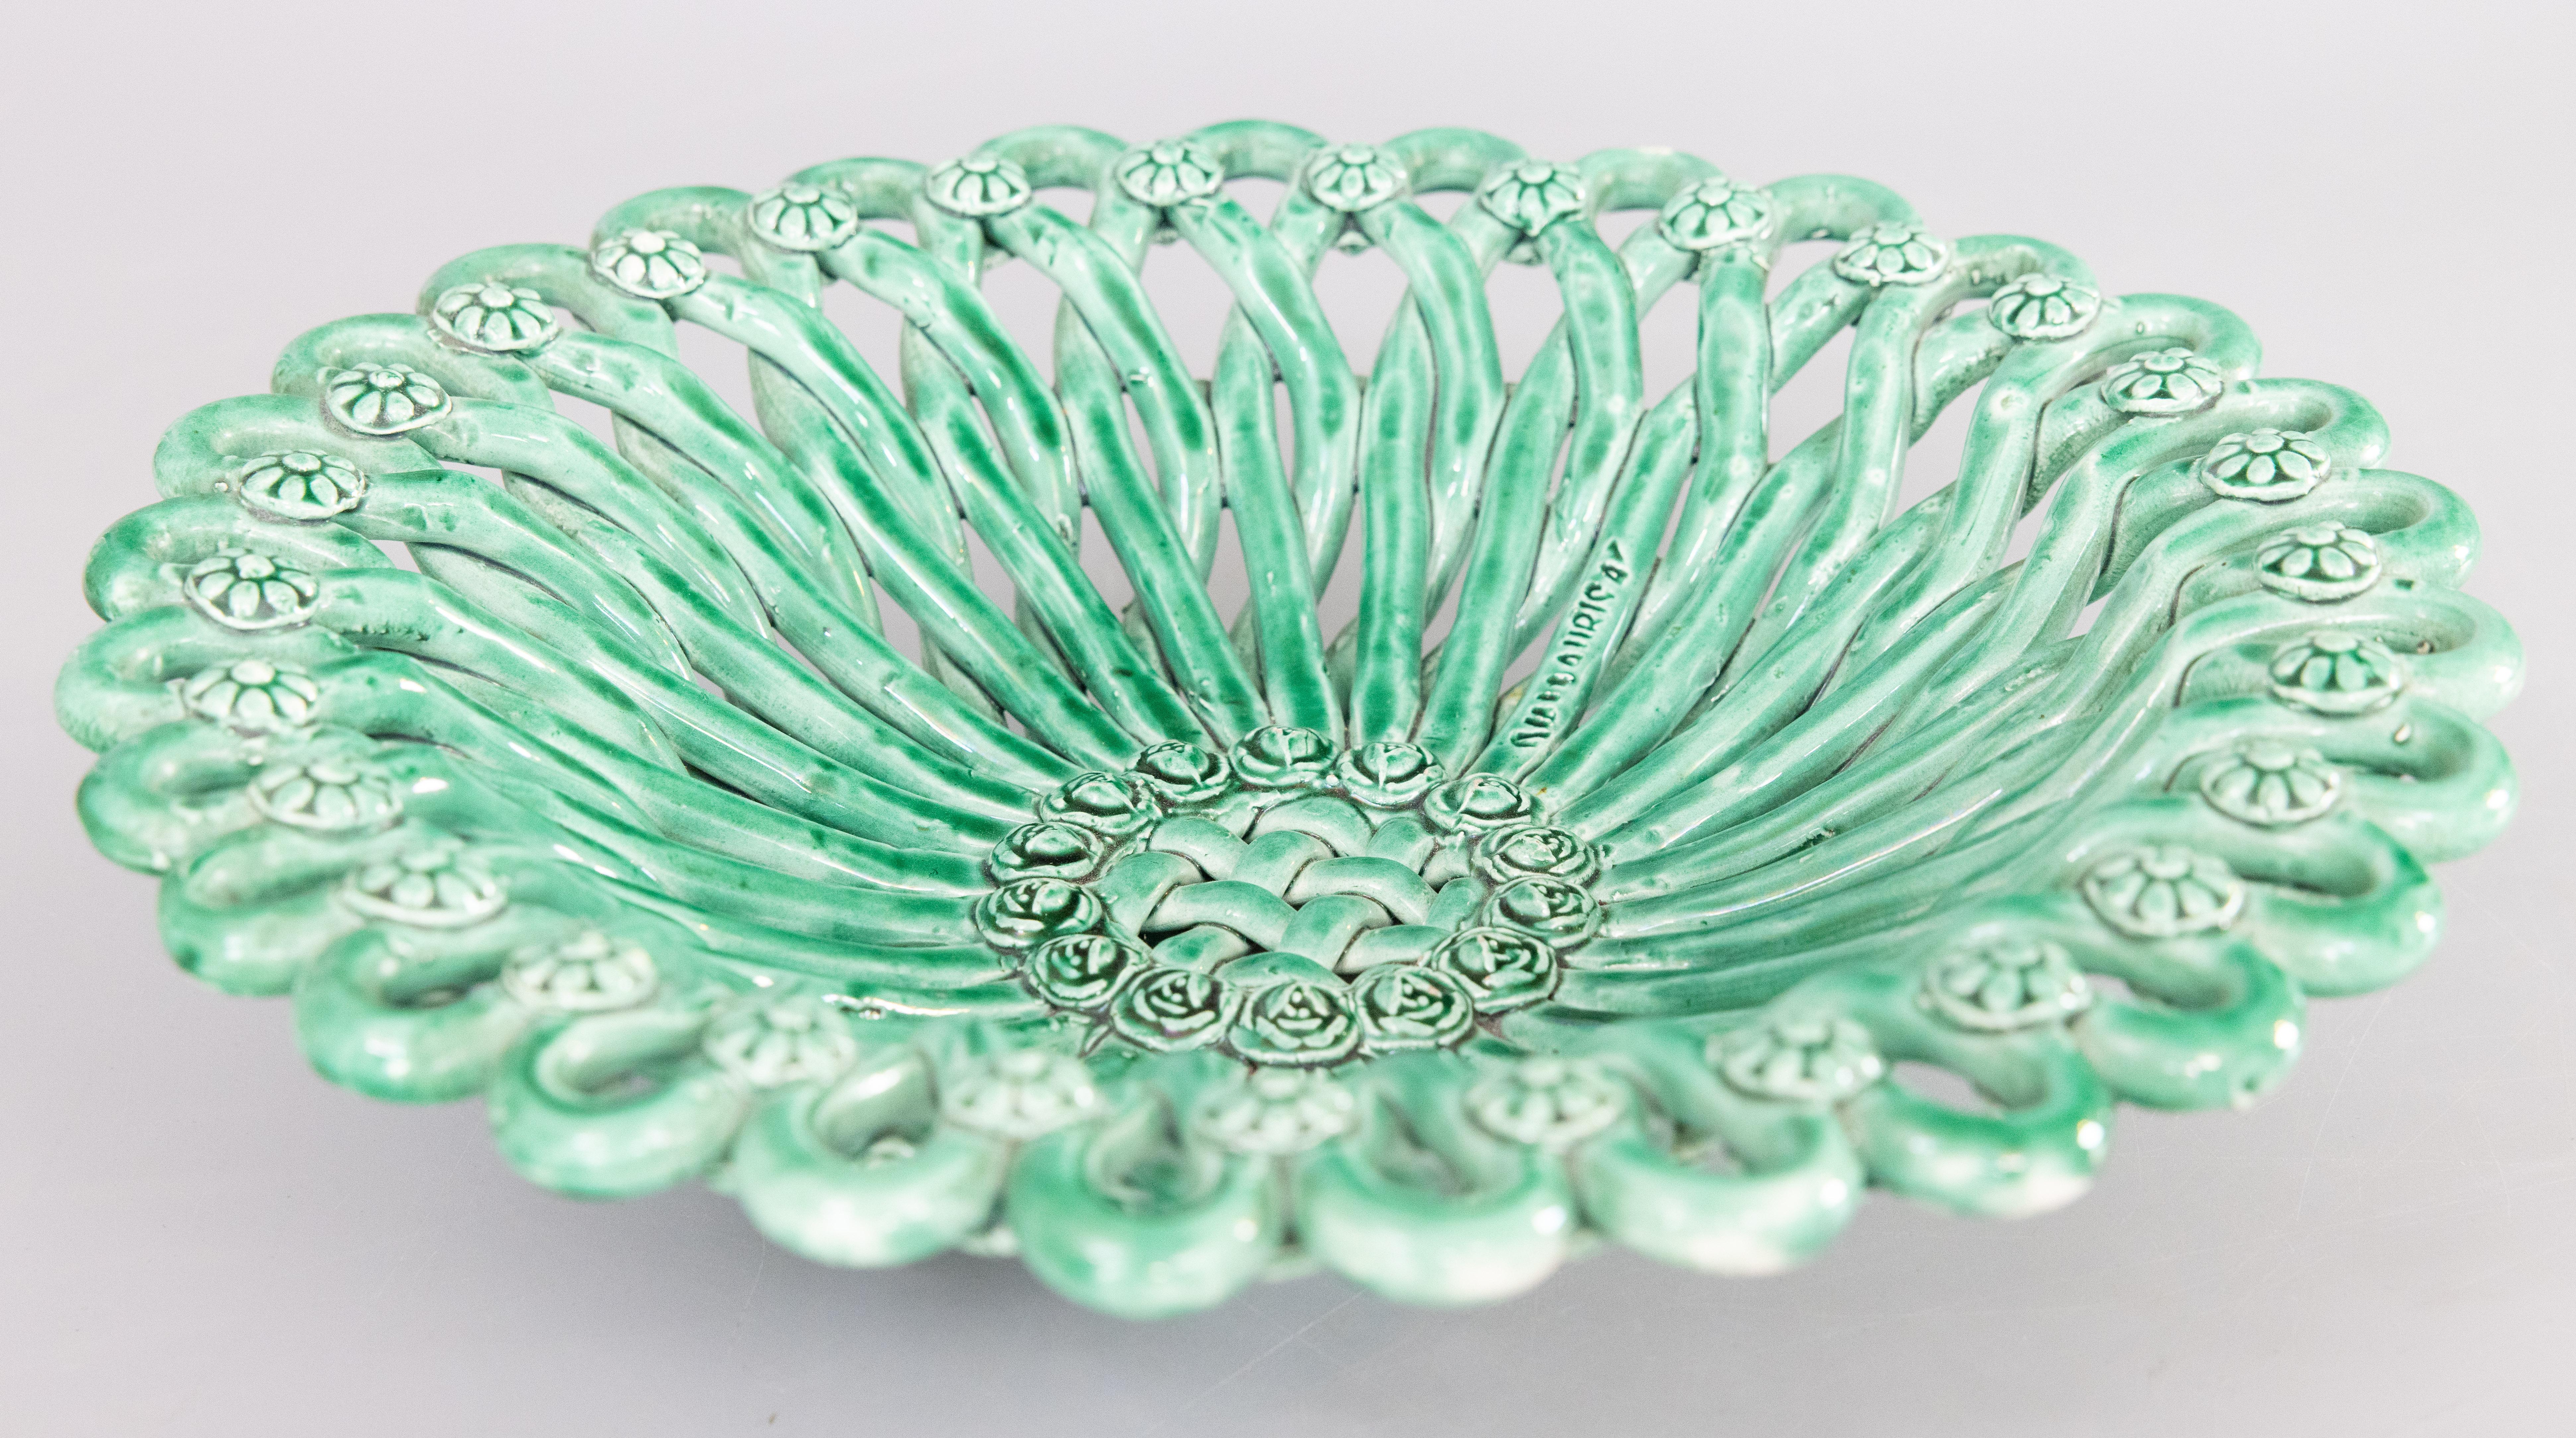 A gorgeous vintage majolica glazed green reticulated basketweave bowl from Vallauris in the French Riviera region of France, circa 1940. Maker's mark on interior. Vallauris is considered the capital of French pottery and is often referred to as the